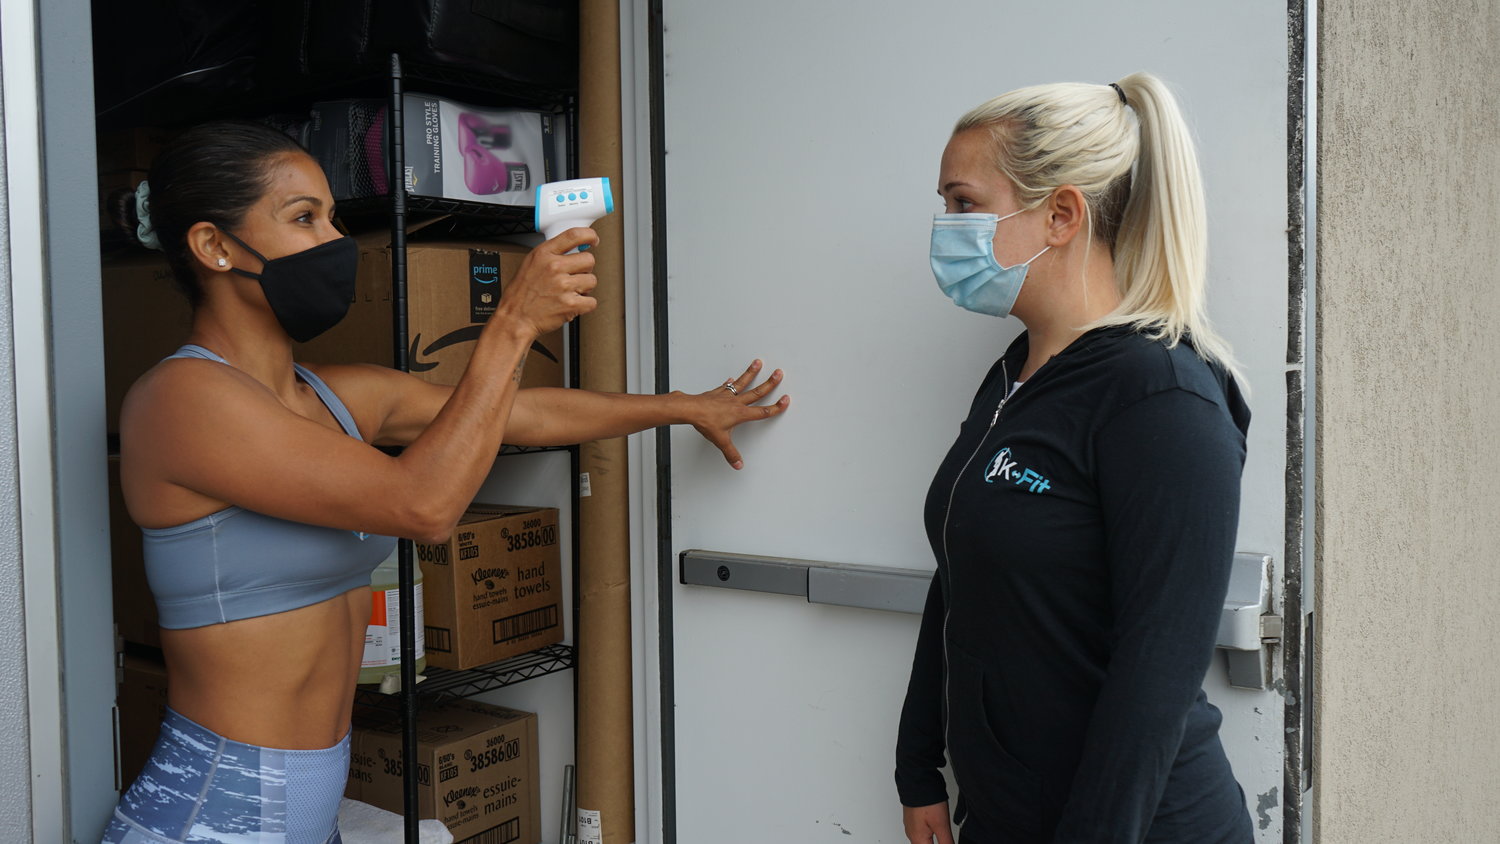 Melo, left, will check her clients’ temperatures before they enter her studio as she restarts indoor classes.